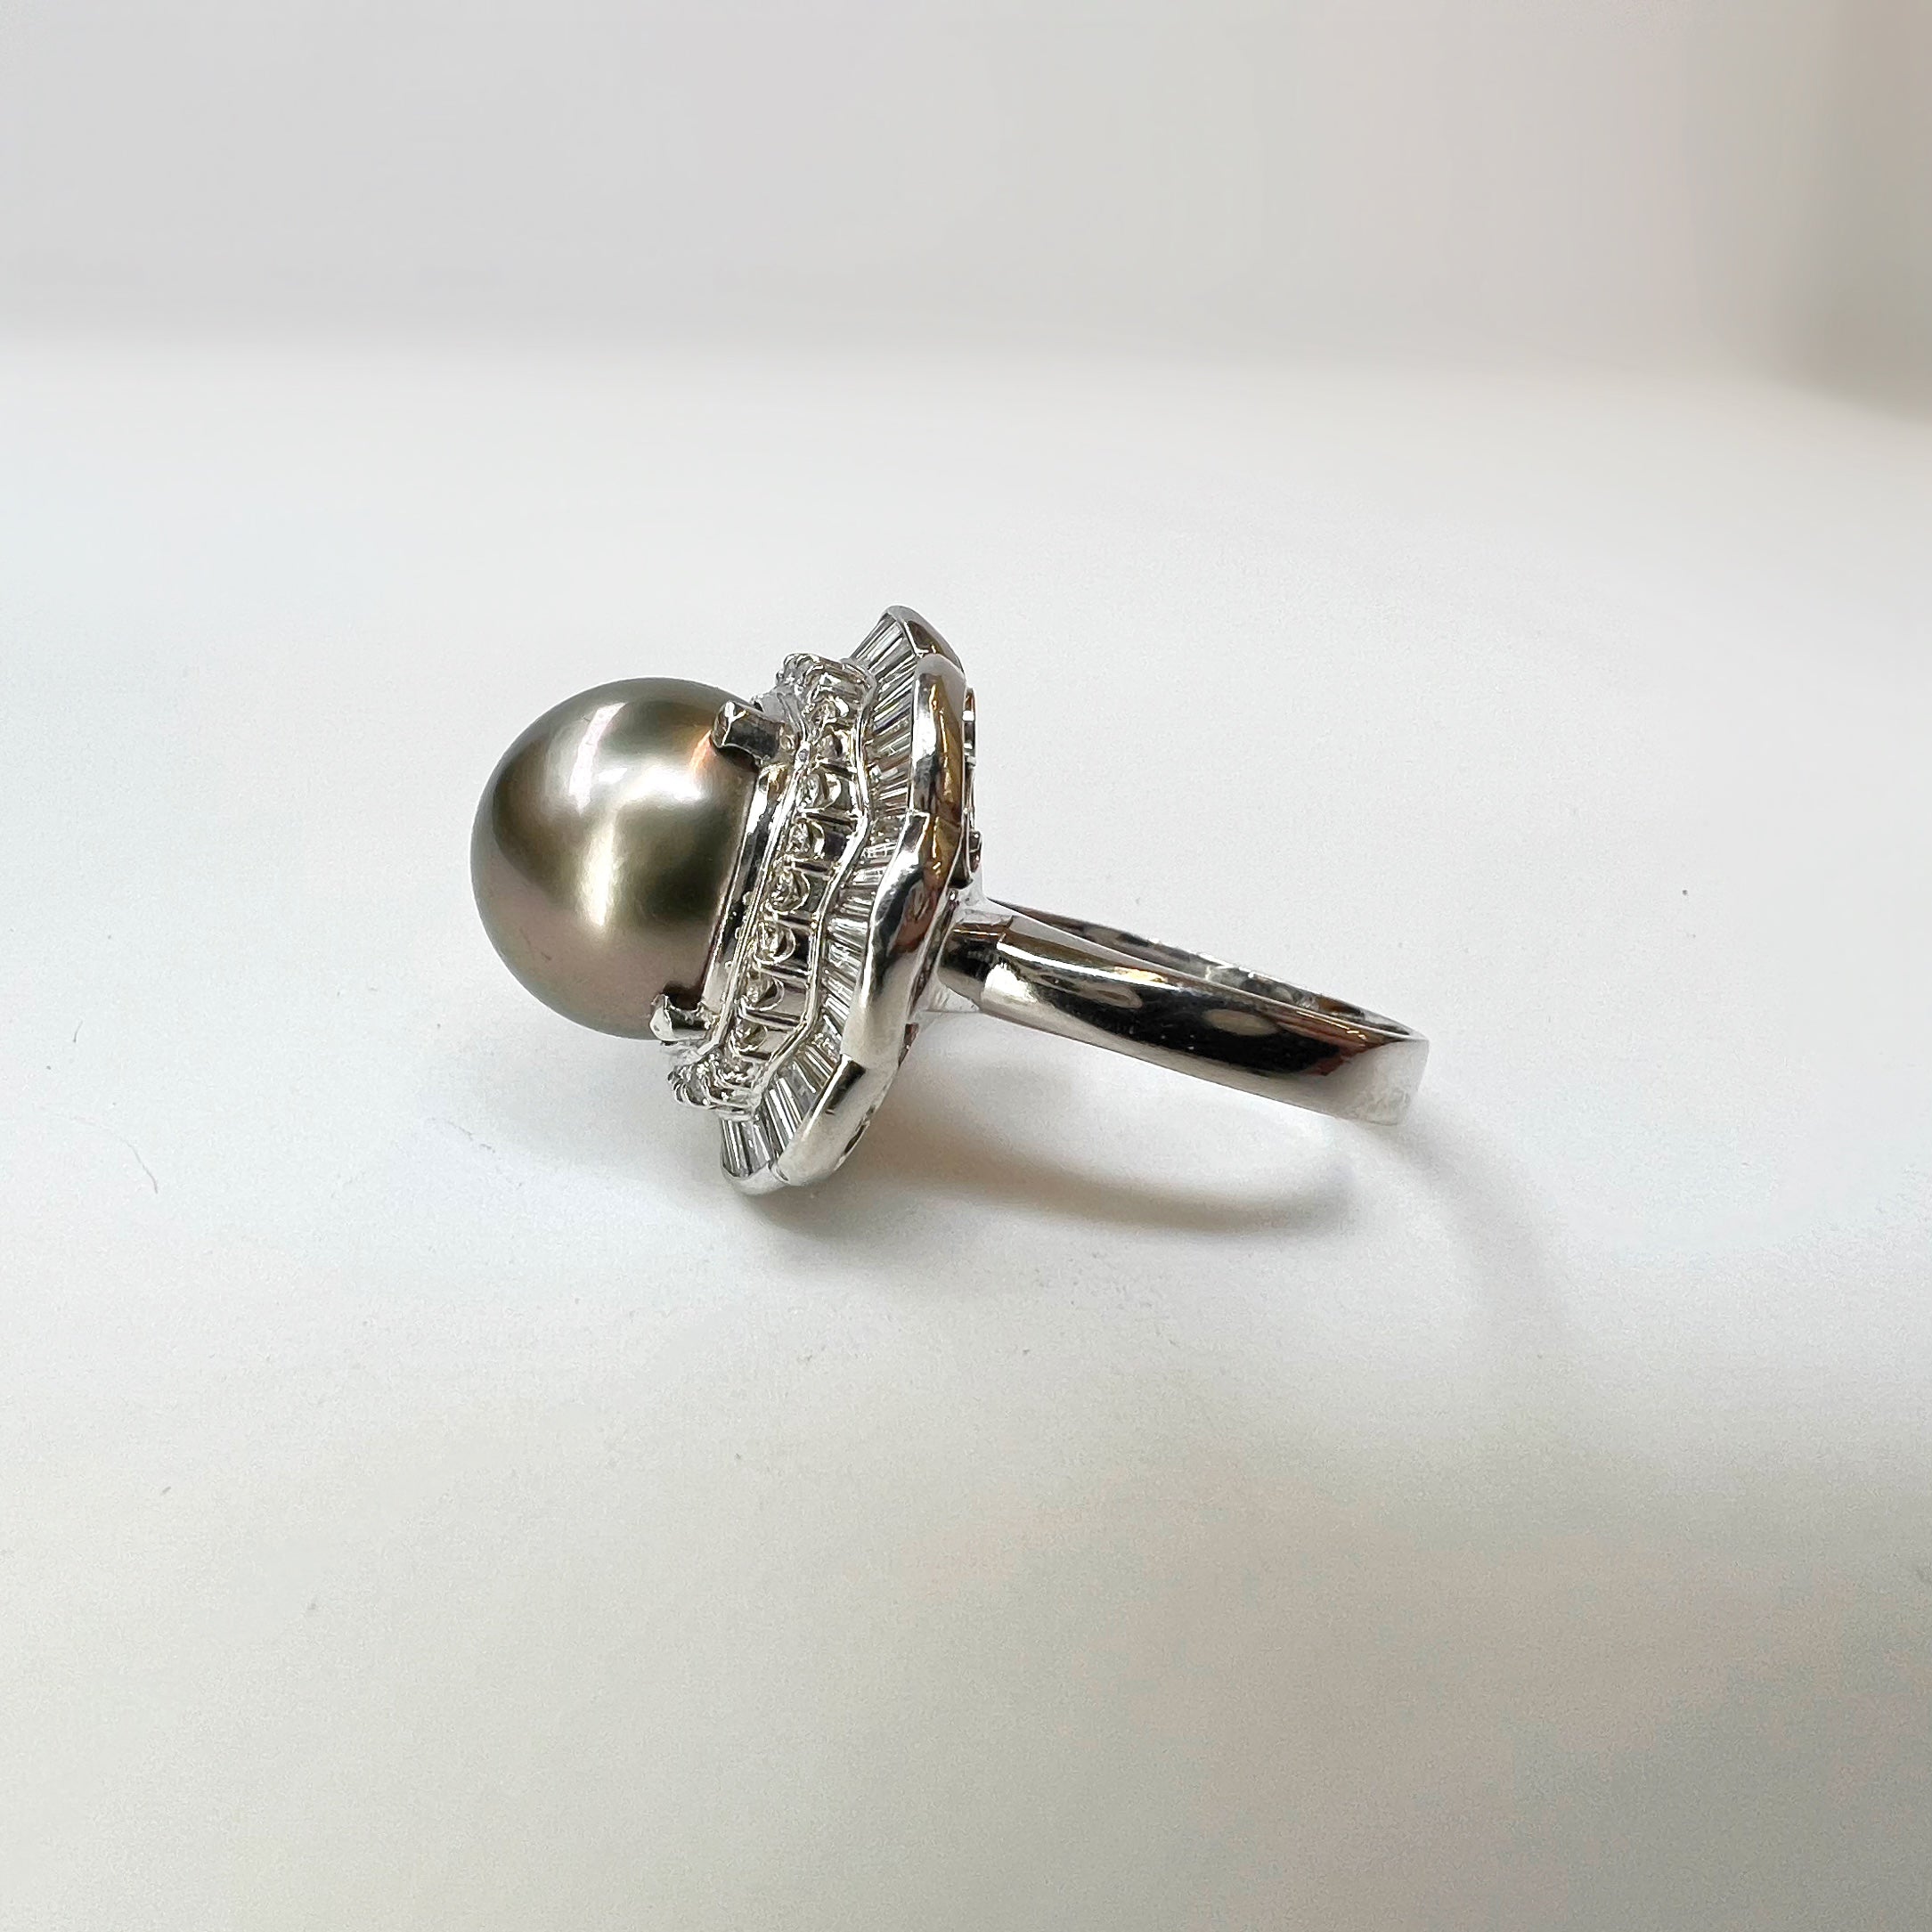 Grey Pearl and Diamond Cocktail Ring